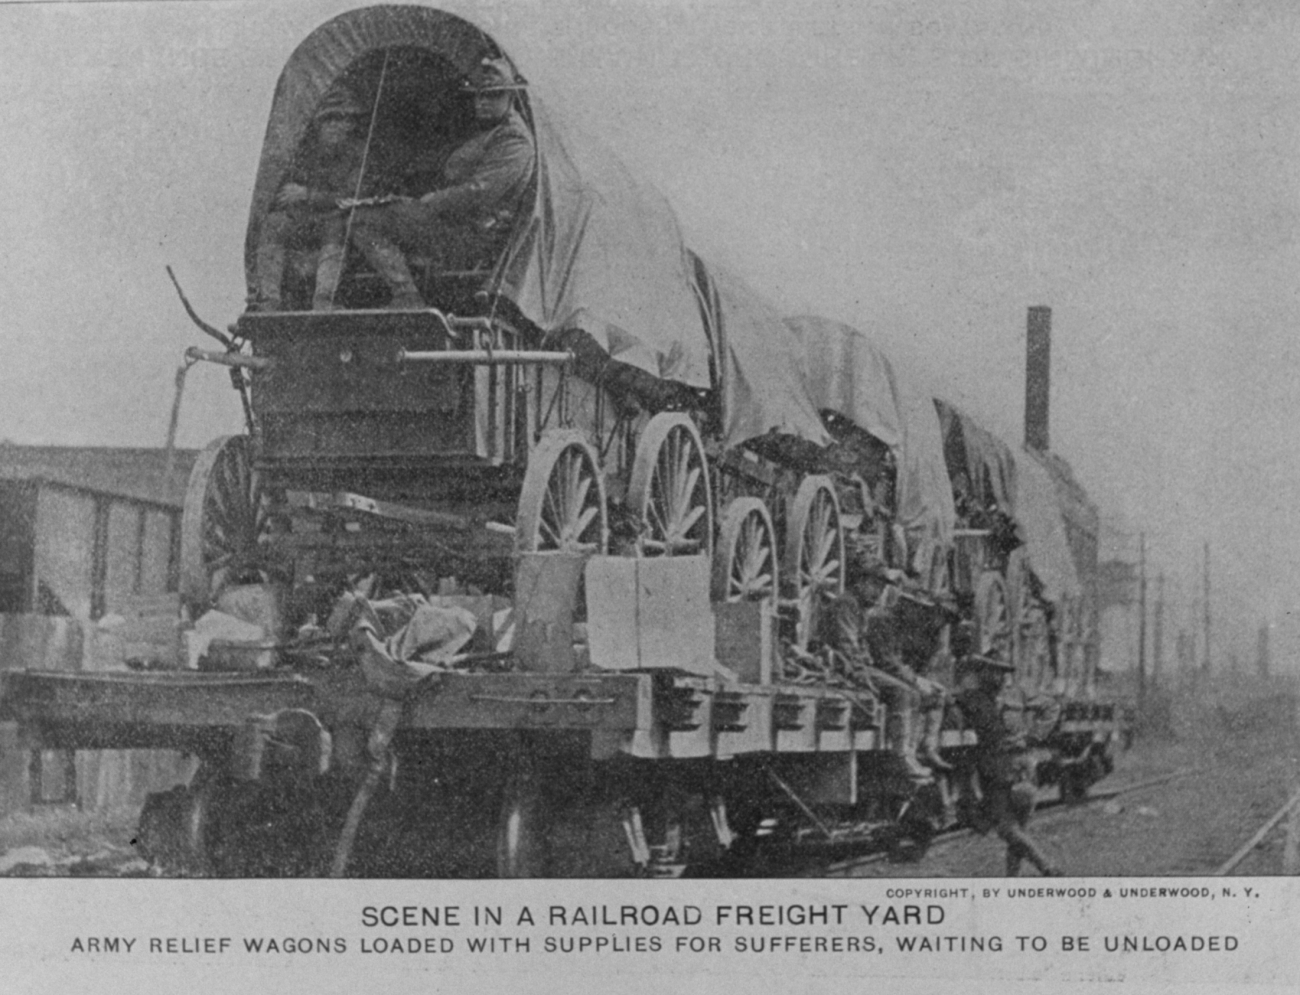 Army relief wagons waiting to be unloaded somewhere in Ohio